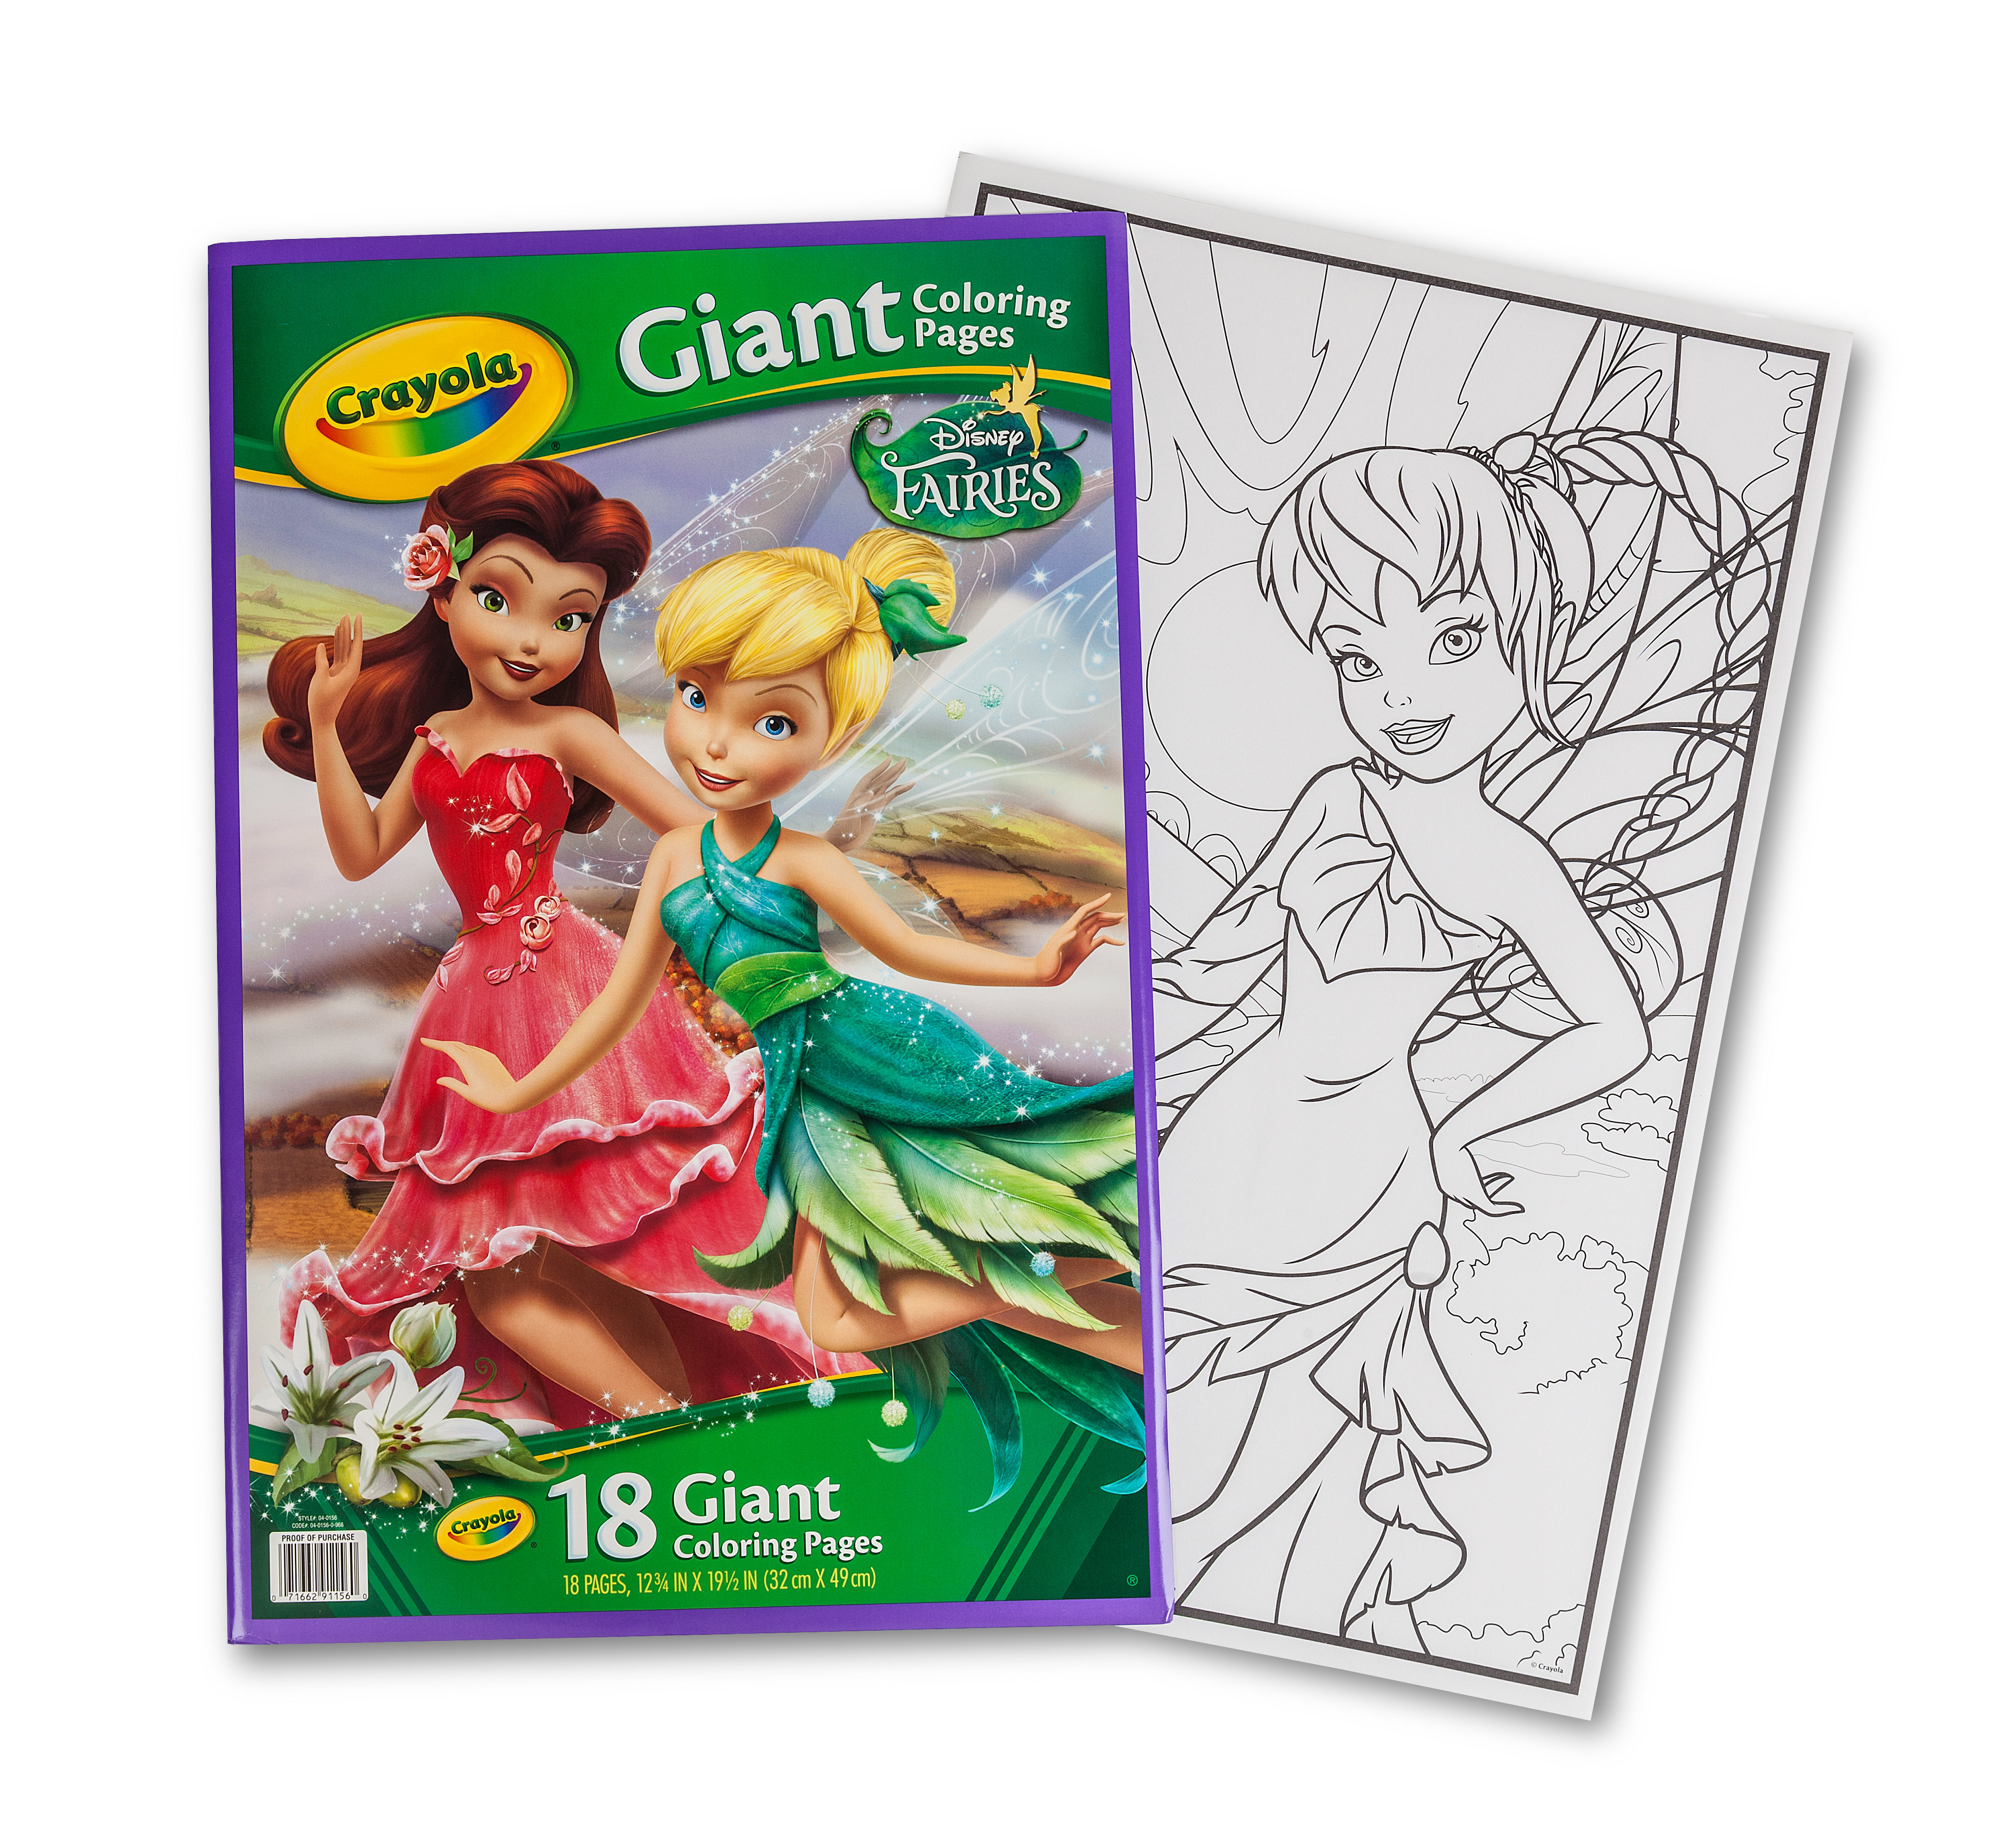 Giant Coloring Pages - Fairies | Crayola